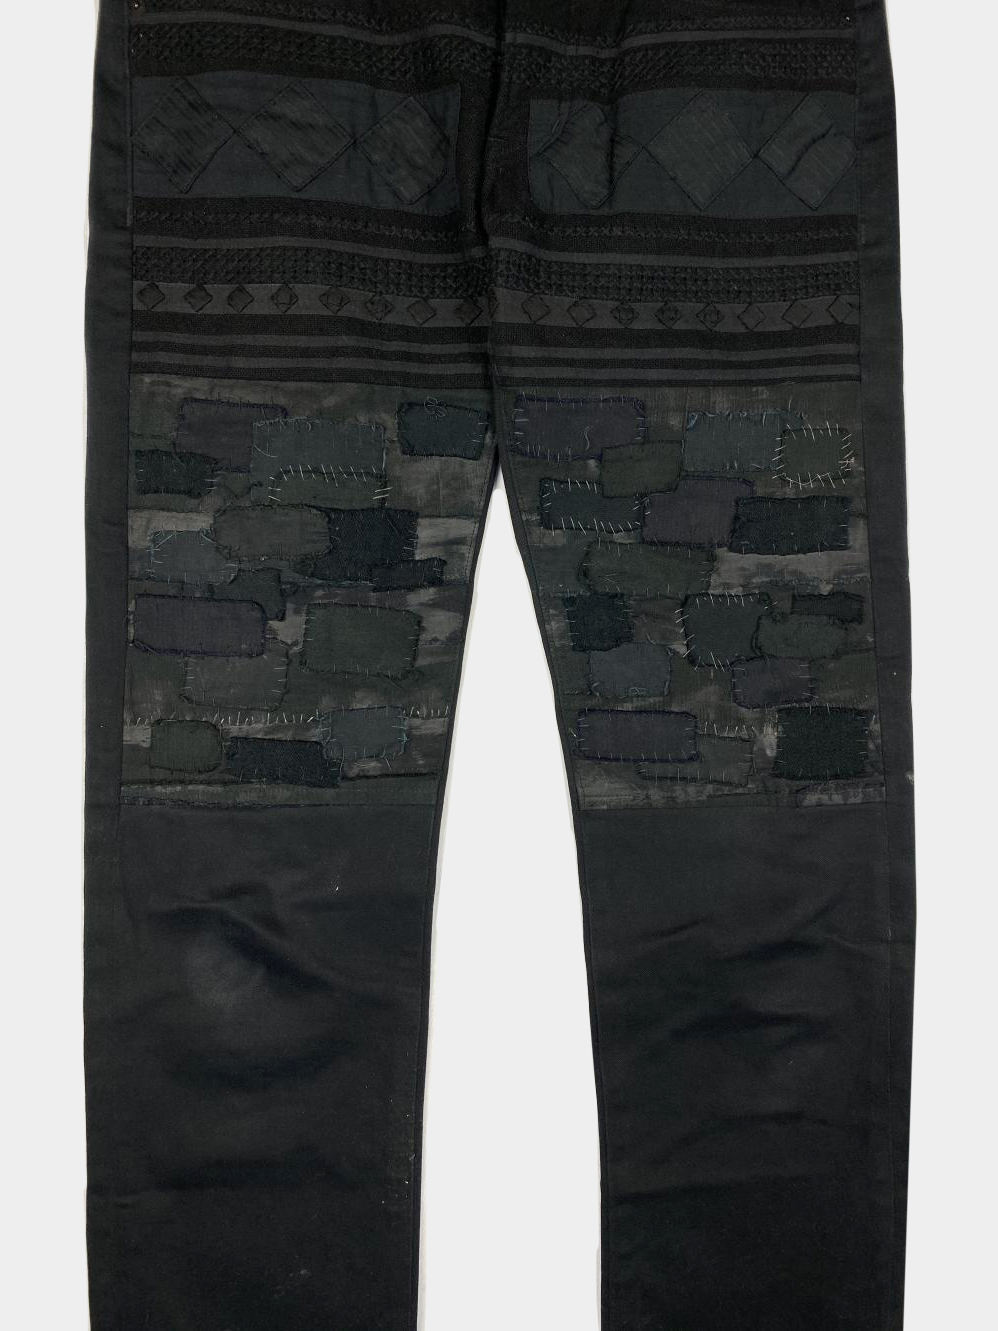 UNDERCOVER A/W09 “Earmuff Maniac” Scab Pants - ARCHIVED